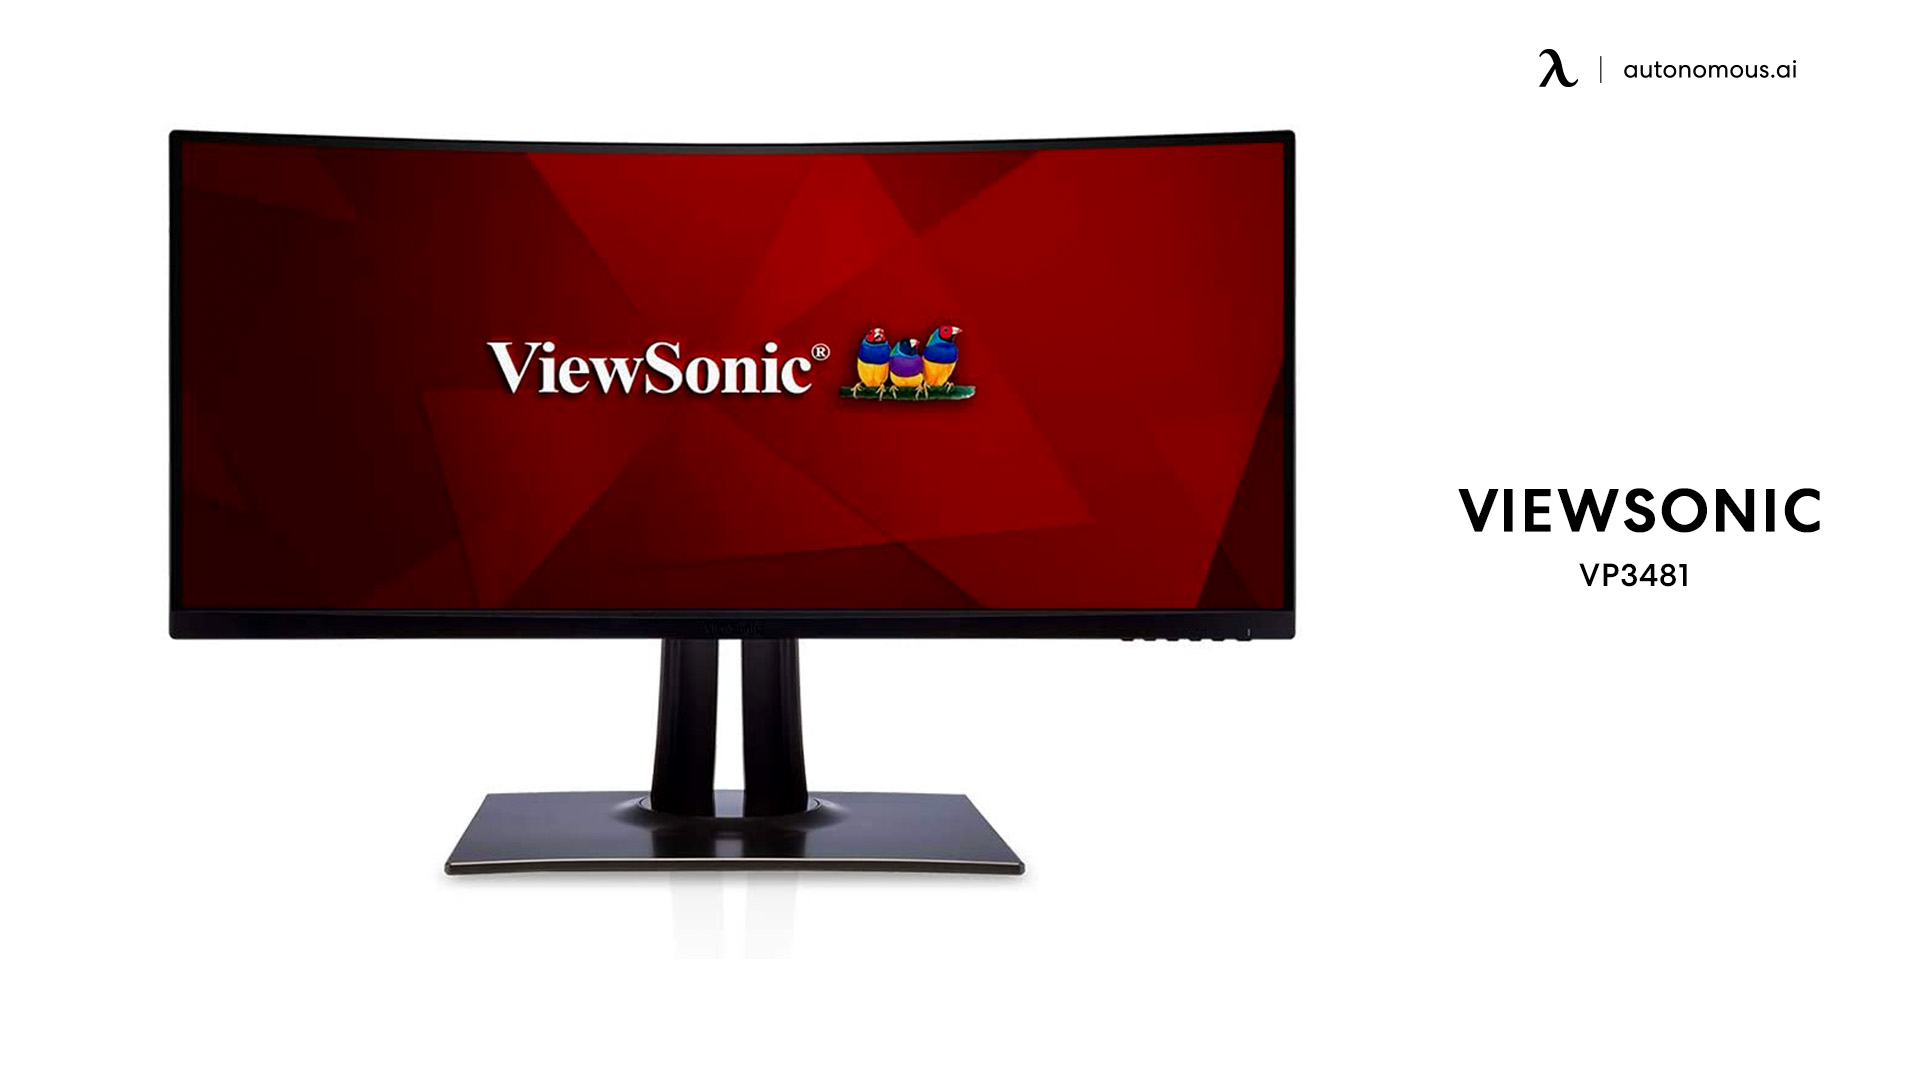 ViewSonic VP3481 curved gaming monitor